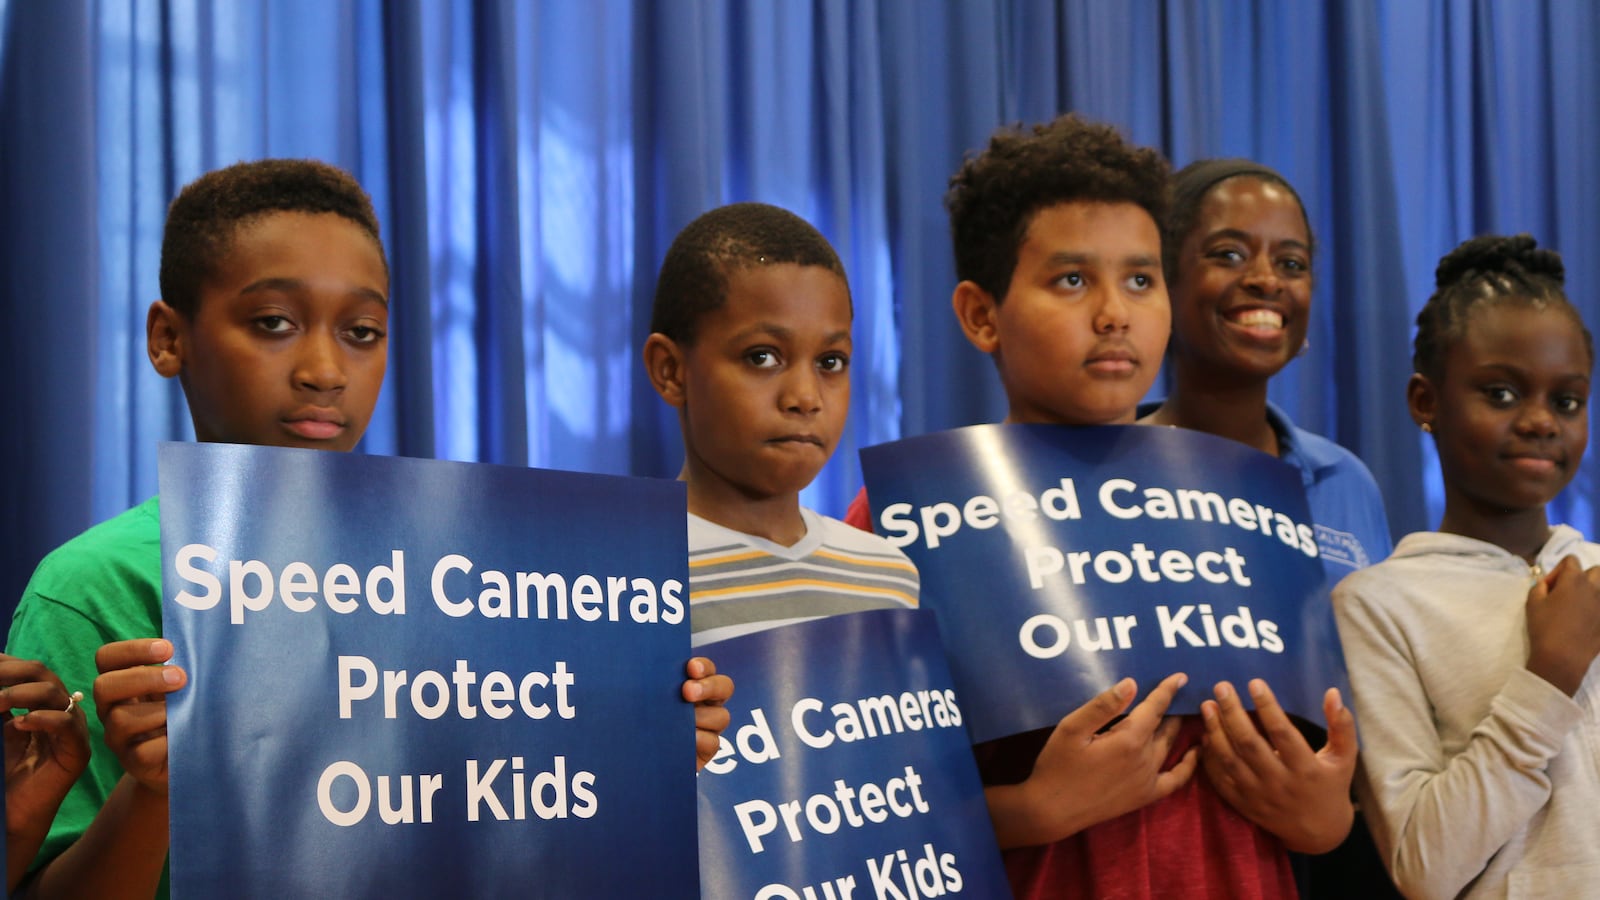 Students held signs during a press conference at Staten Island's P.S. 78, where Mayor Bill de Blasio called on state lawmakers to extend the city's speed camera program.